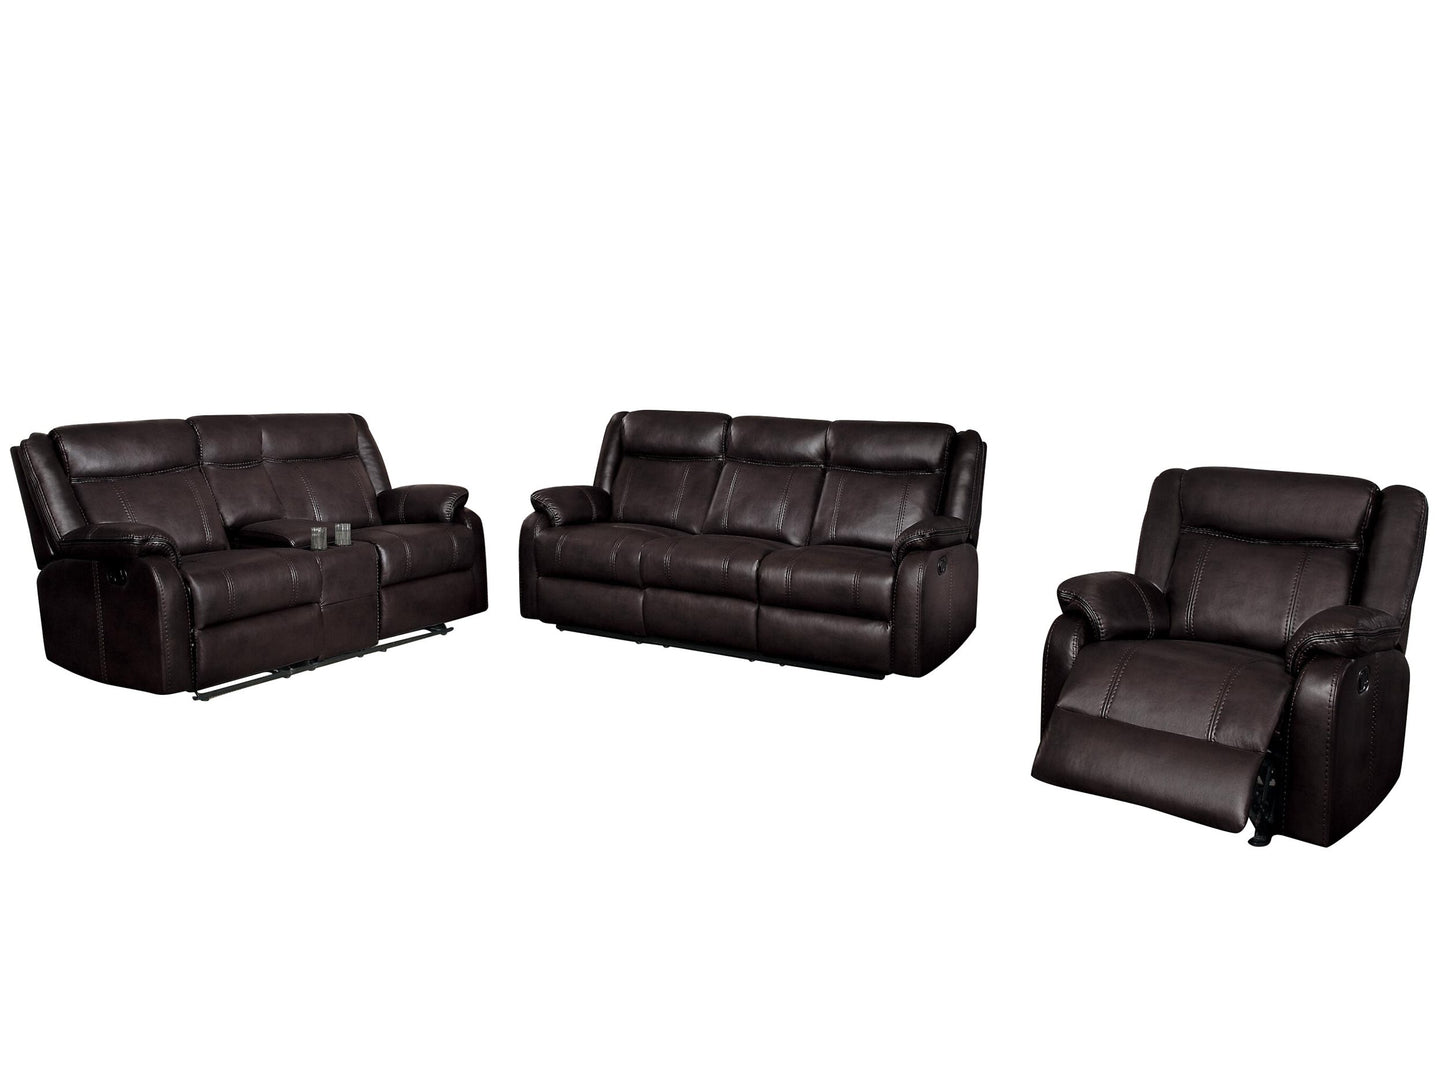 Homelegance Jude 3PC Double Reclining Sofa with Center Drop-Down Cup Holders, Double Glider Reclining Love Seat with Center Console & Glider Reclining Chair in Airehyde Leather - Dark Brown